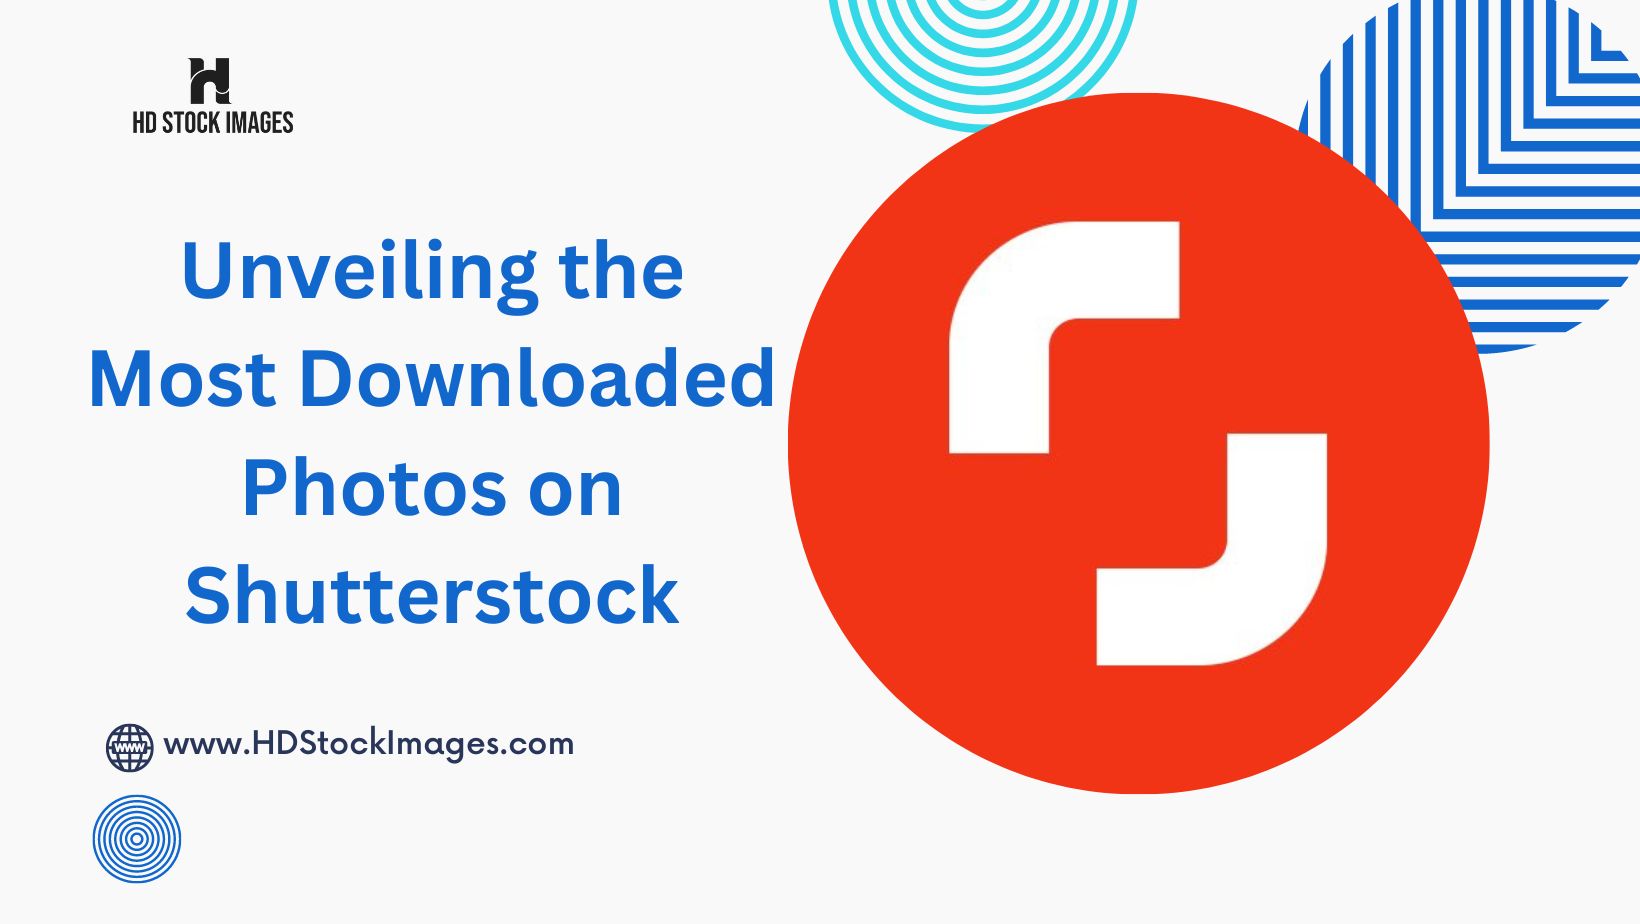 An image of Most Downloaded Images on Shutterstock